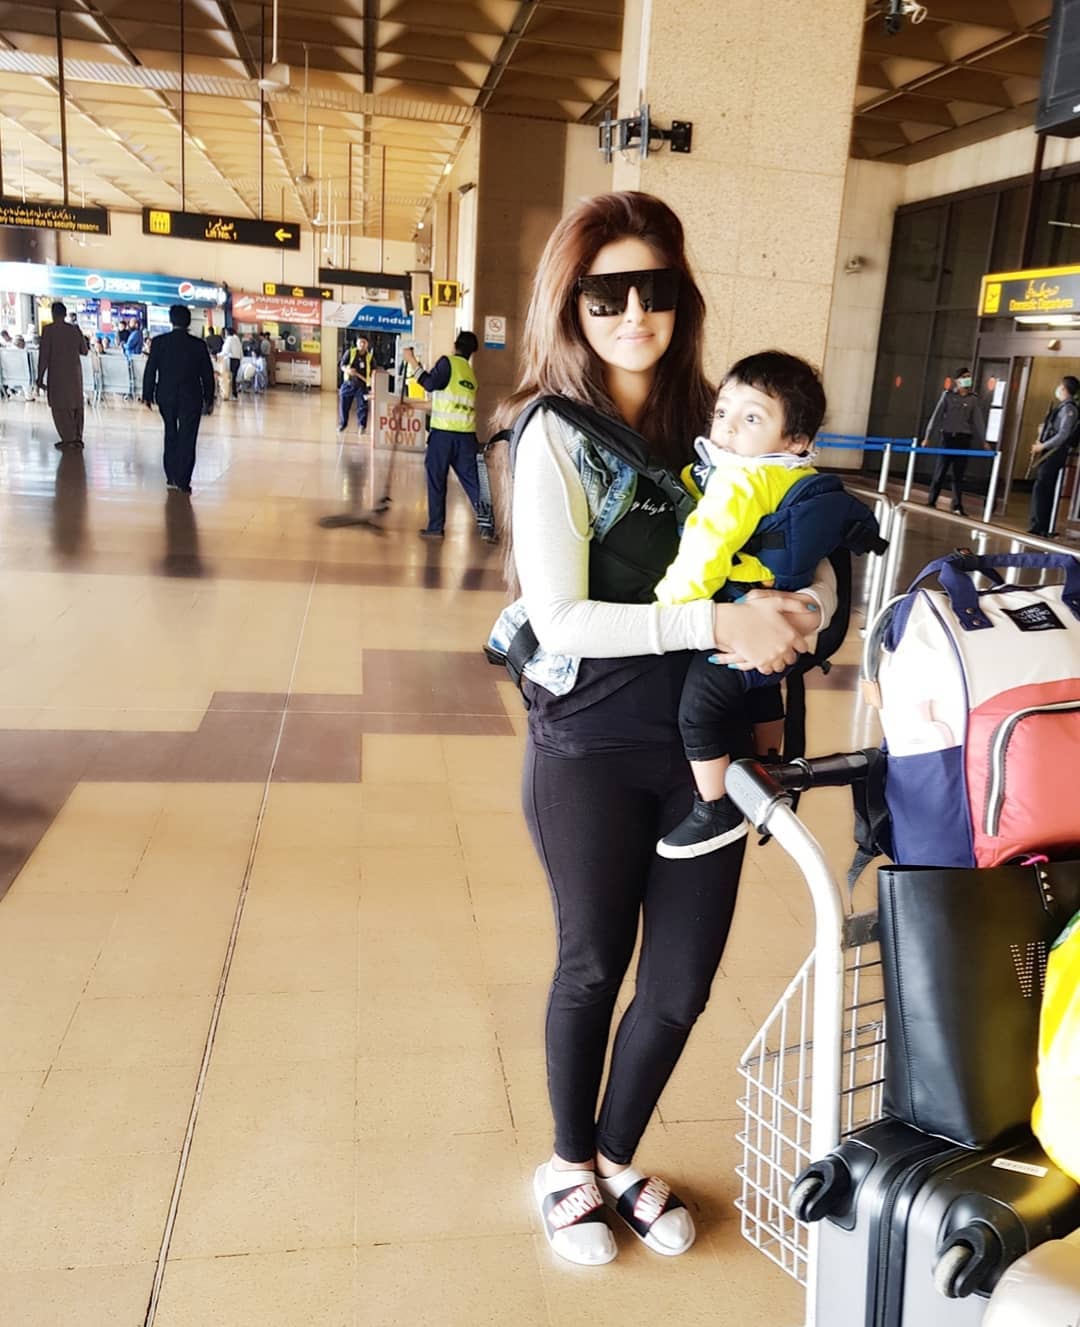 Actress Fatima Sohail Latest Pictures with her Son